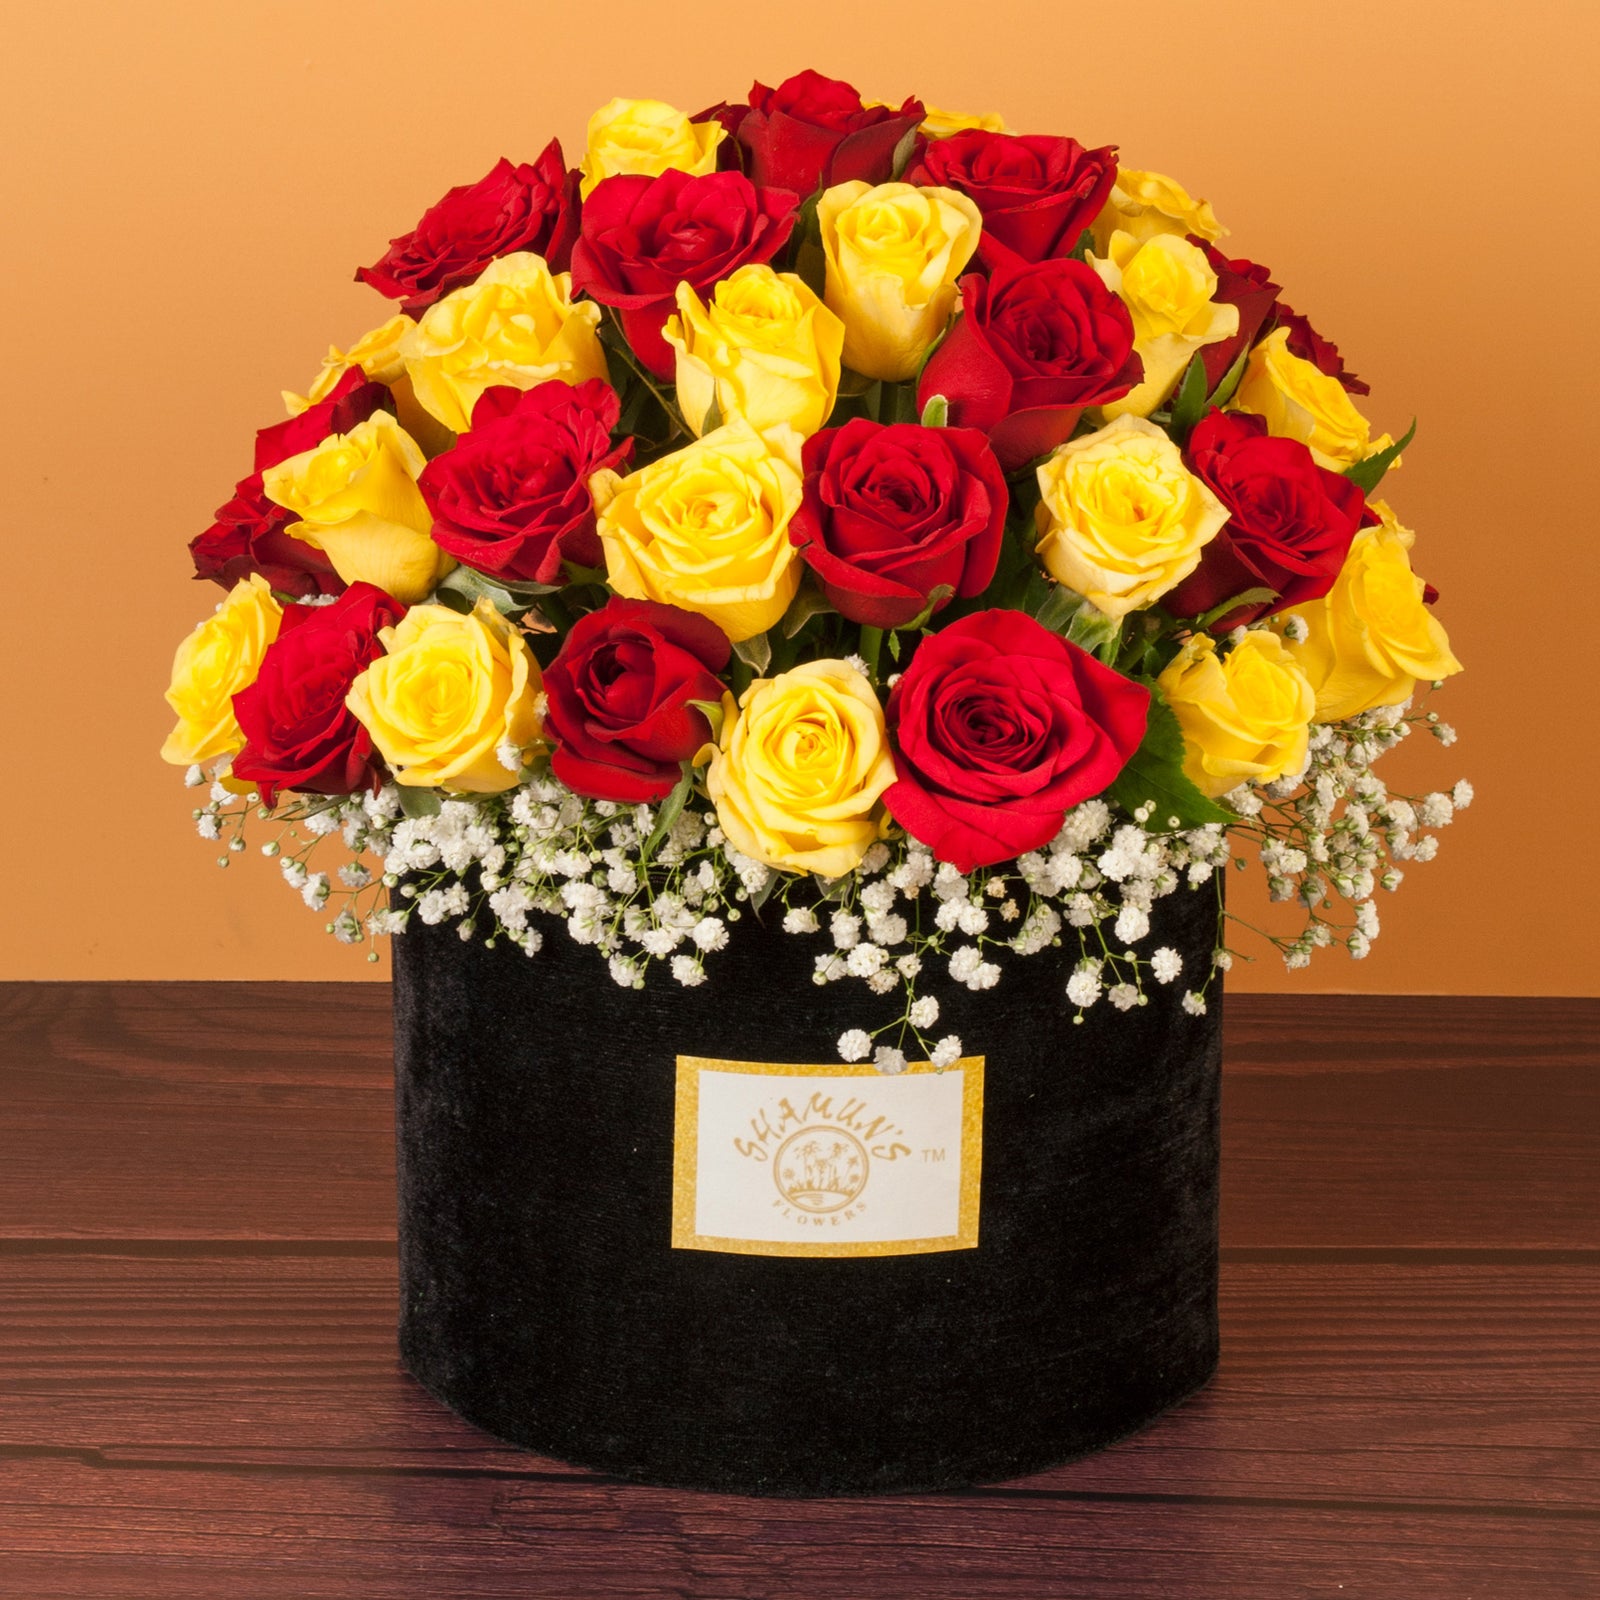 Red & Yellow Roses Delivered In A Hat Box